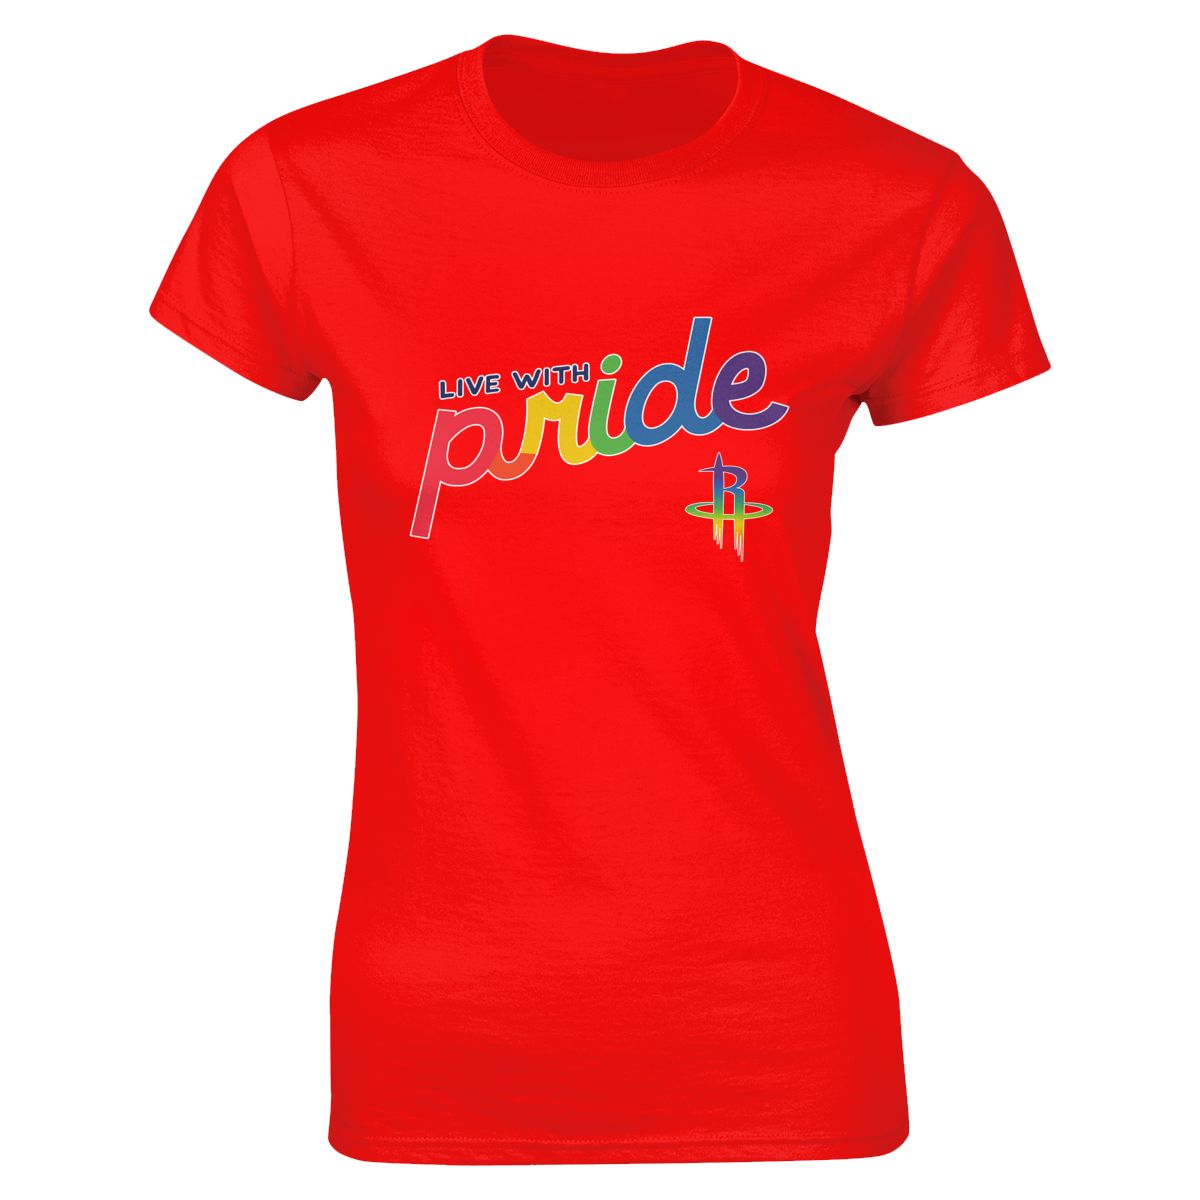 Houston Rockets Live With Pride Women's Classic-Fit T-Shirt